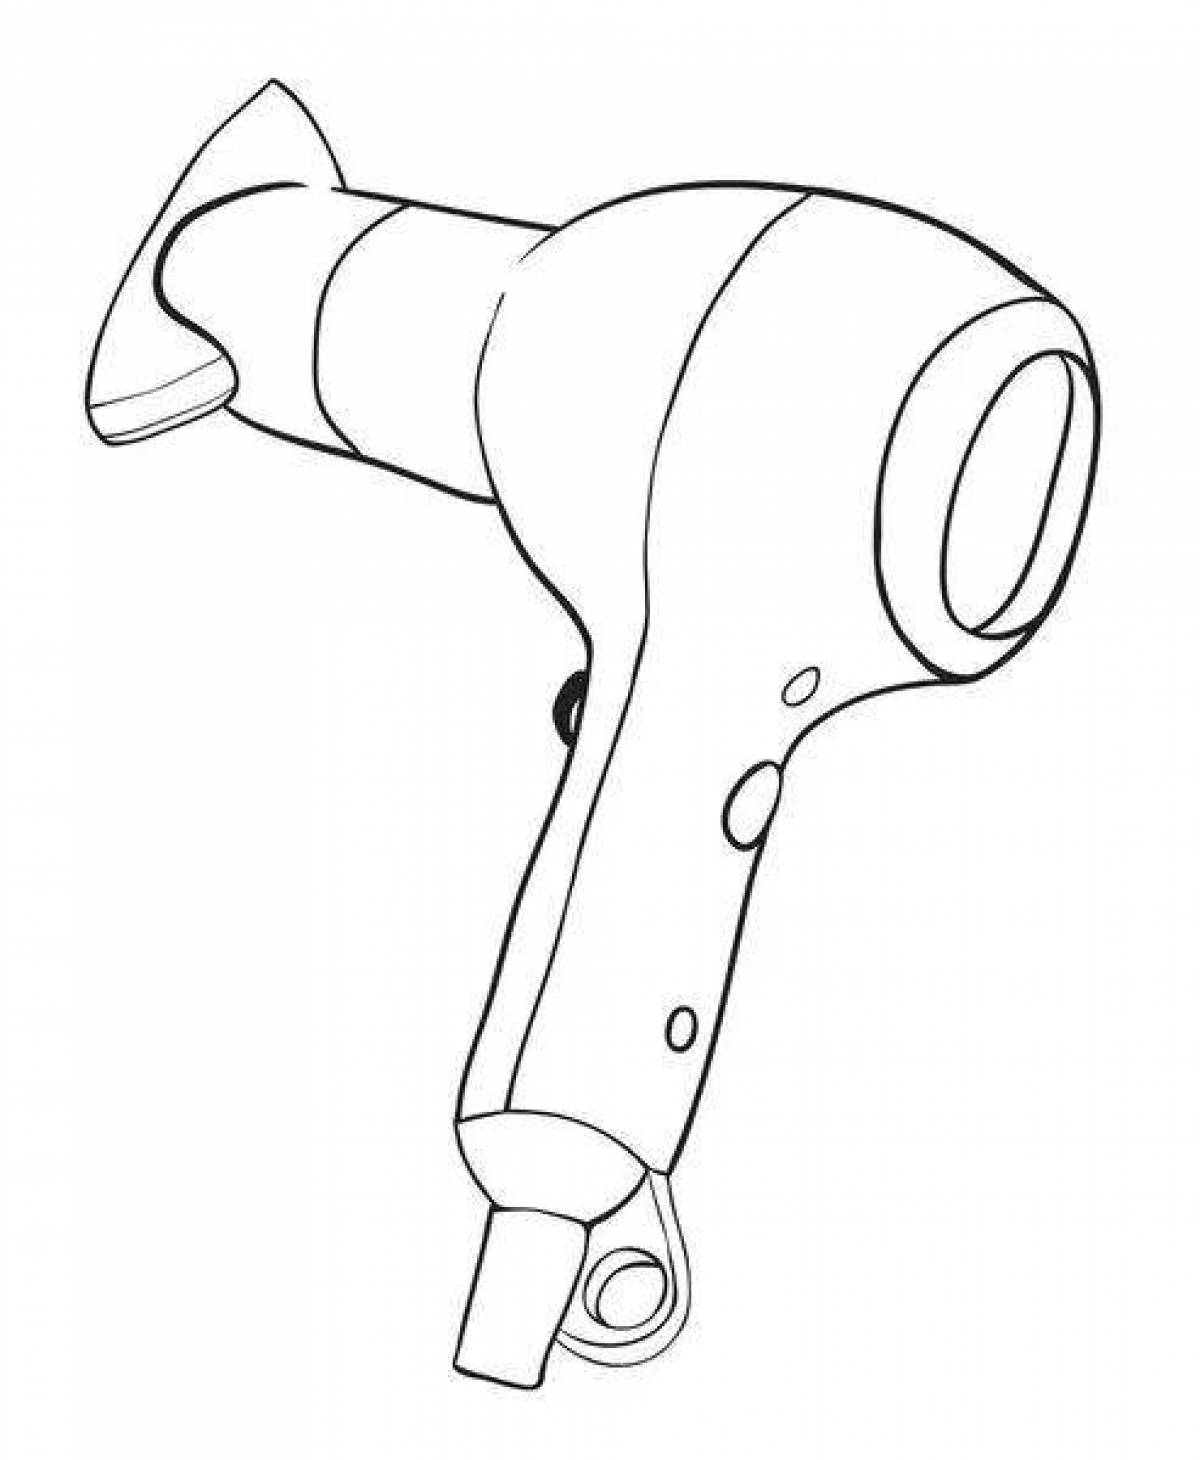 Colorful hair dryer coloring page